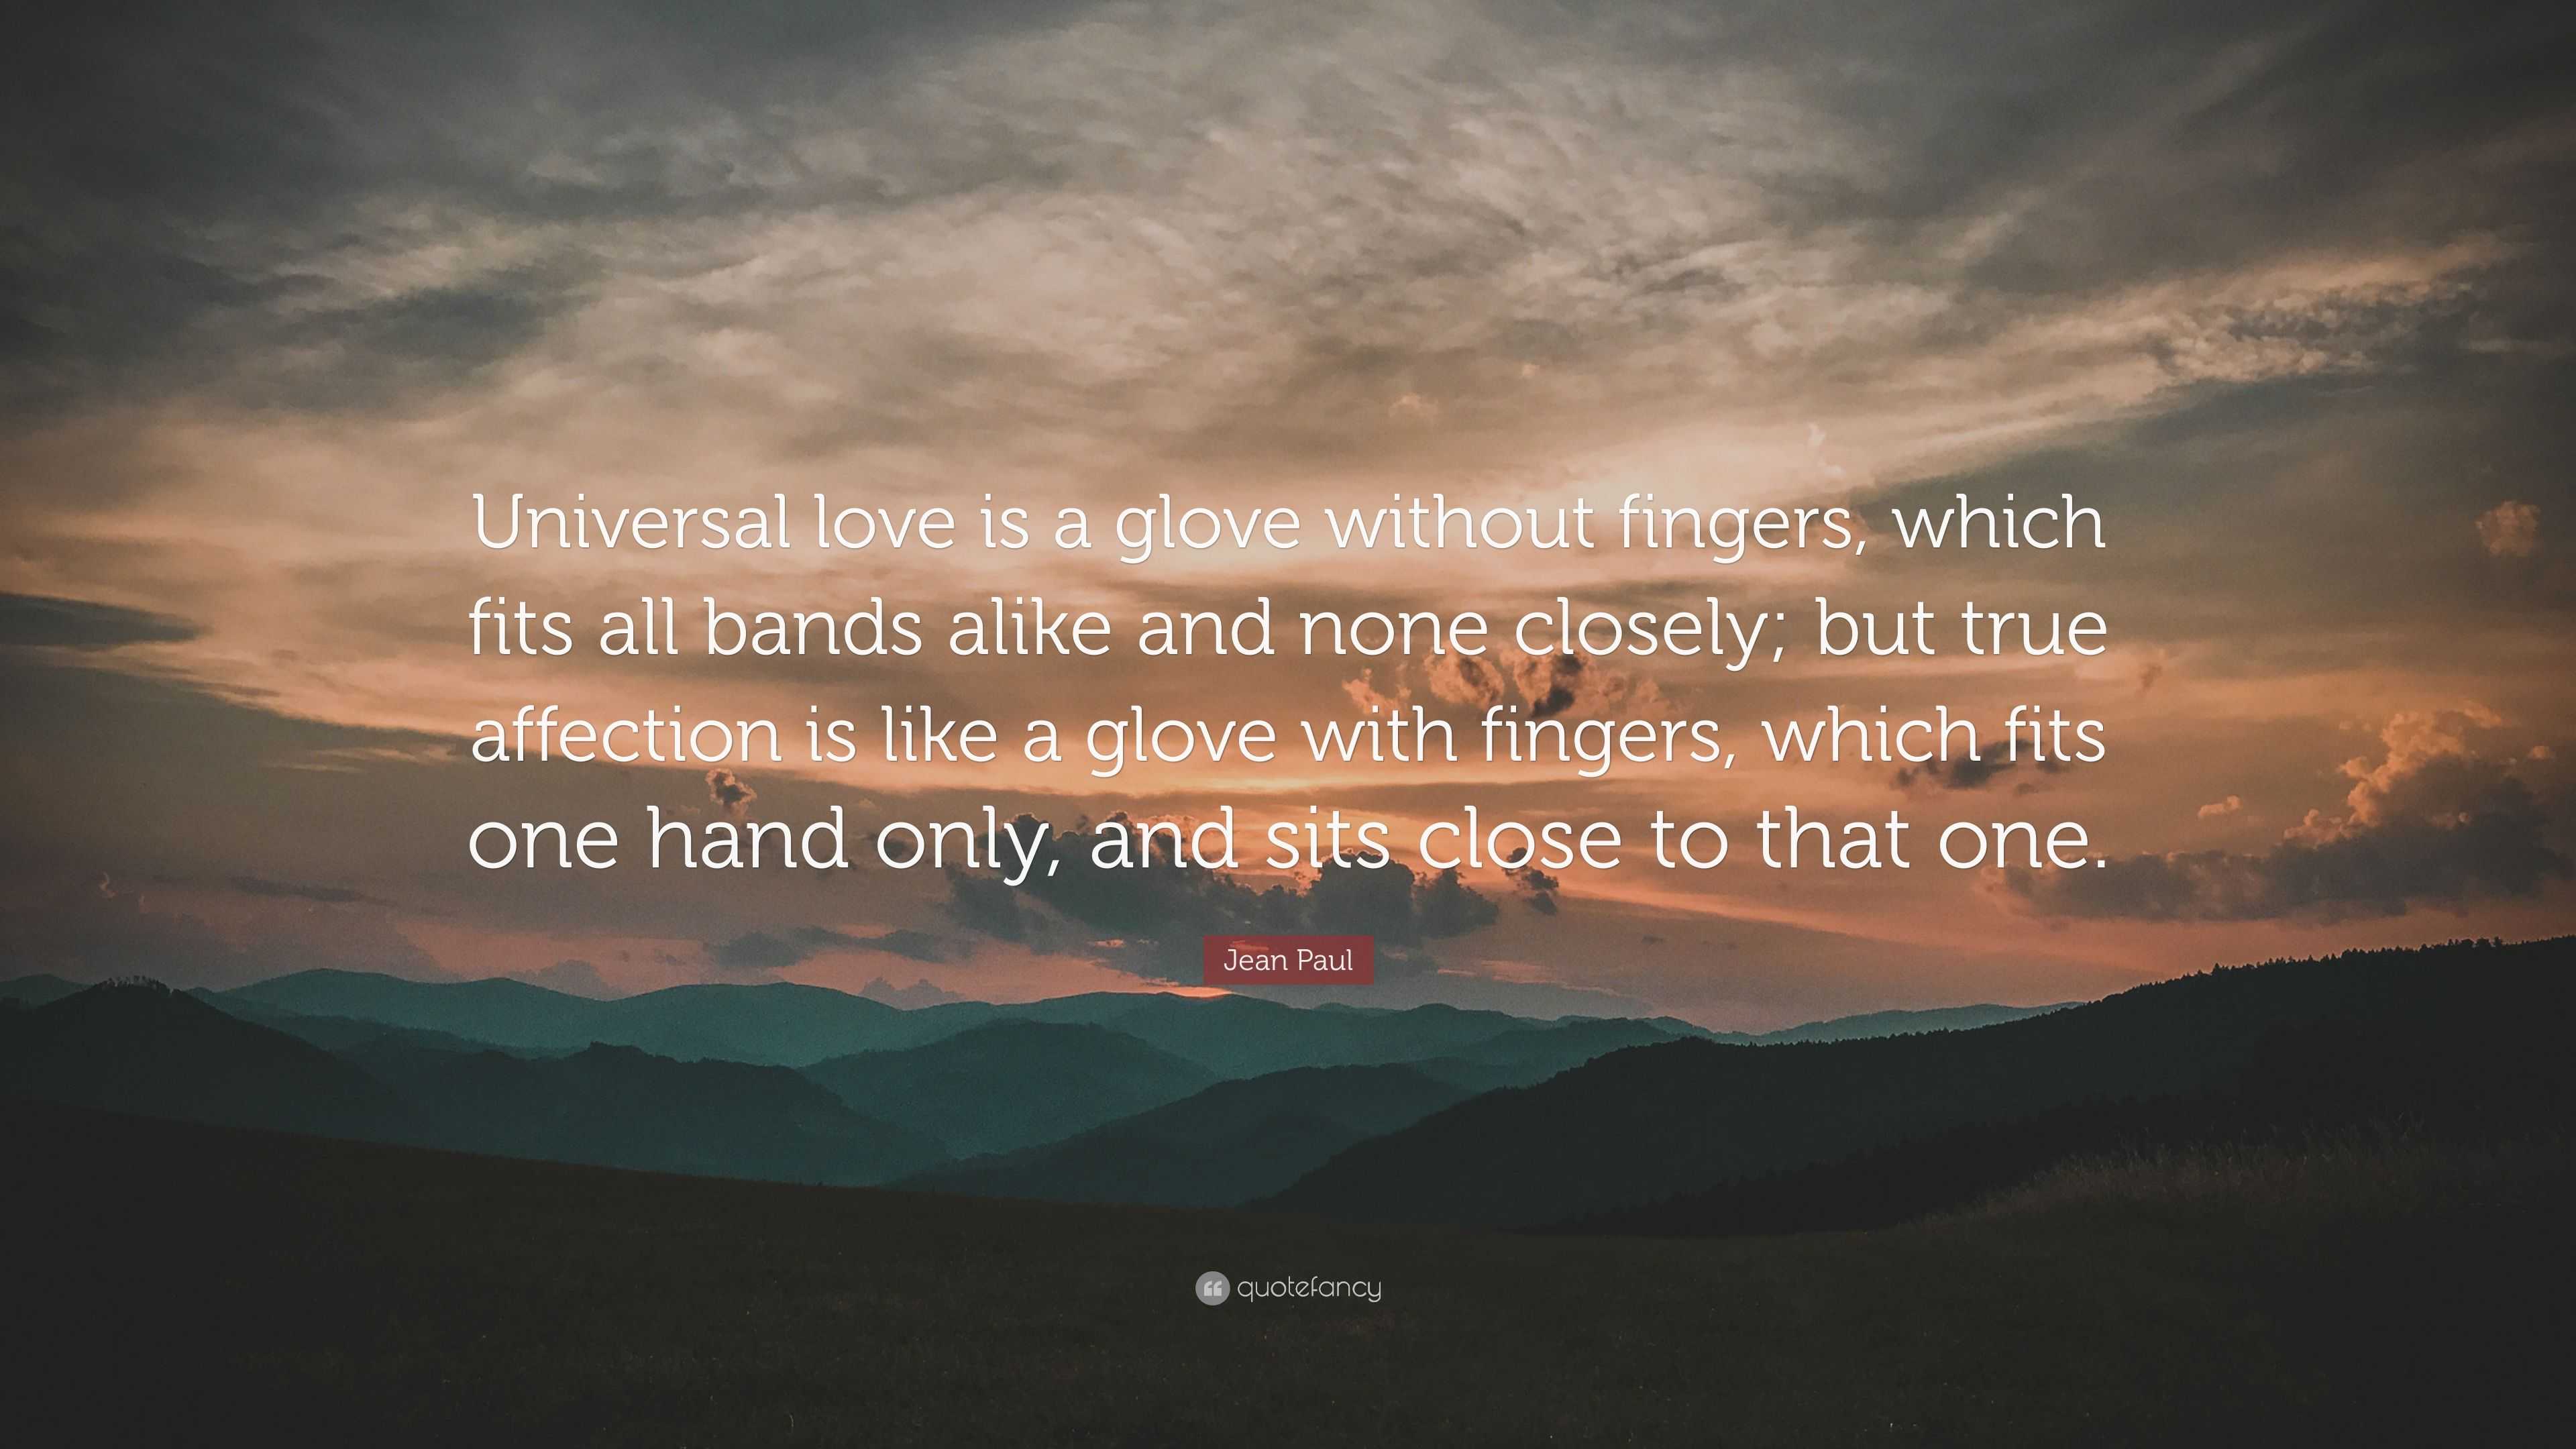 Jean Paul Quote “Universal love is a glove without fingers which fits all